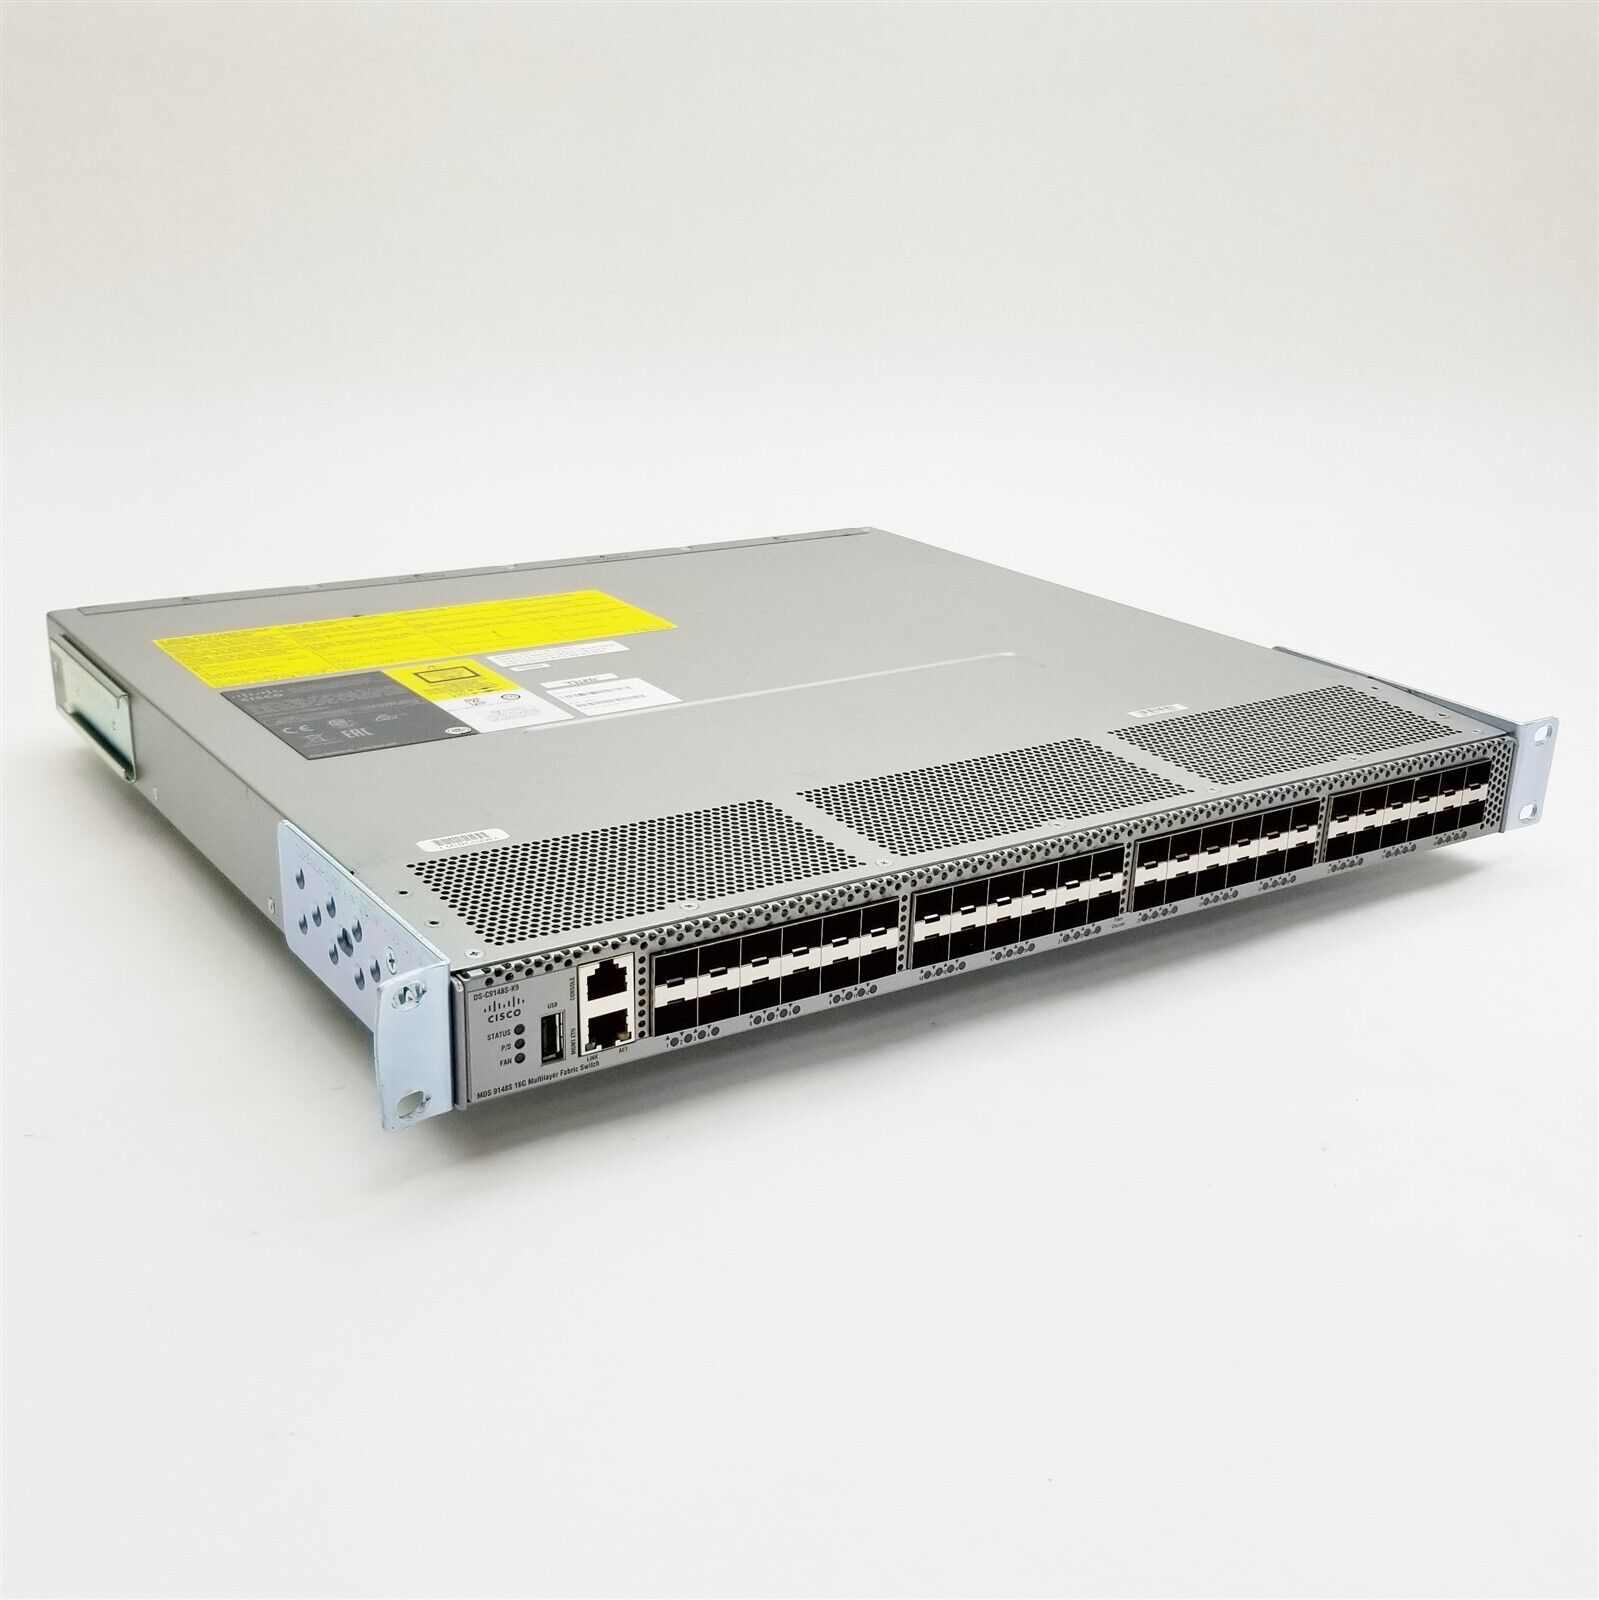 Cisco DS-C9148S-K9 MDS 9148S 16Gbps FC Multilayer Fabric Switch 24-Active ports